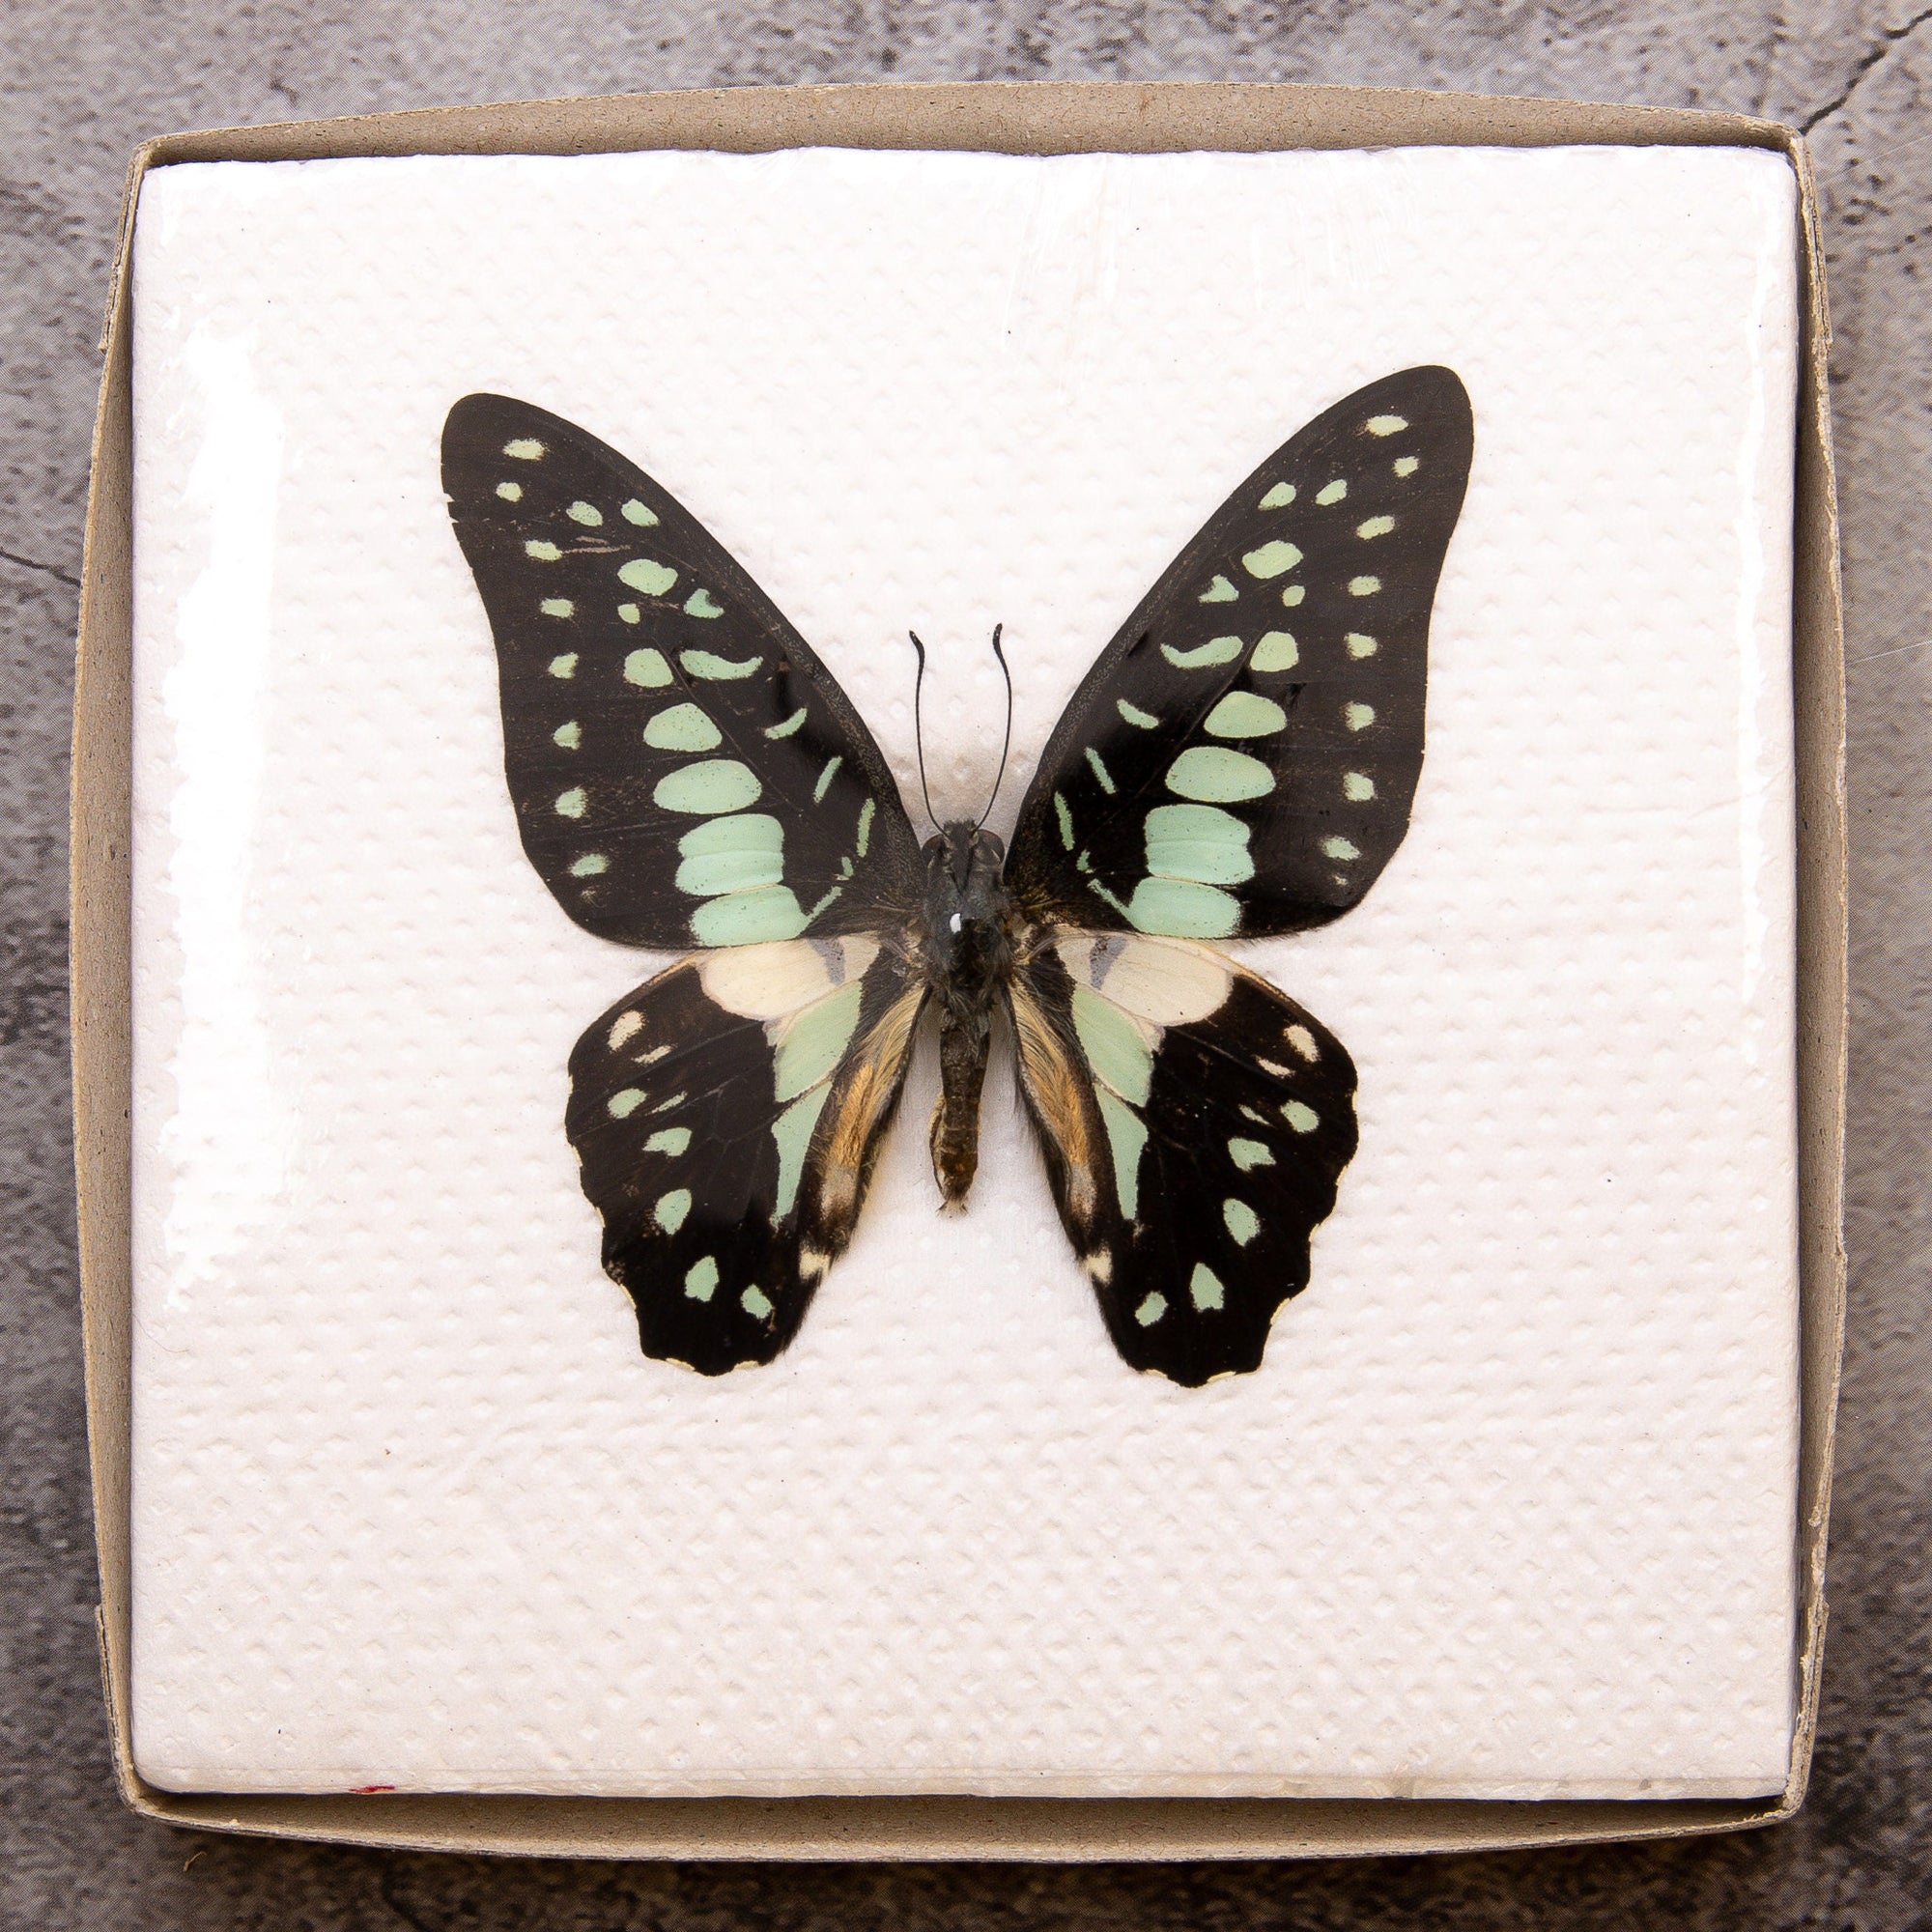 Pack of 2 Common Jay Butterflies (Graphium doson) WINGS-SPREAD, Ethically Sourced Preserved Specimens for Collecting & Artistic Creation